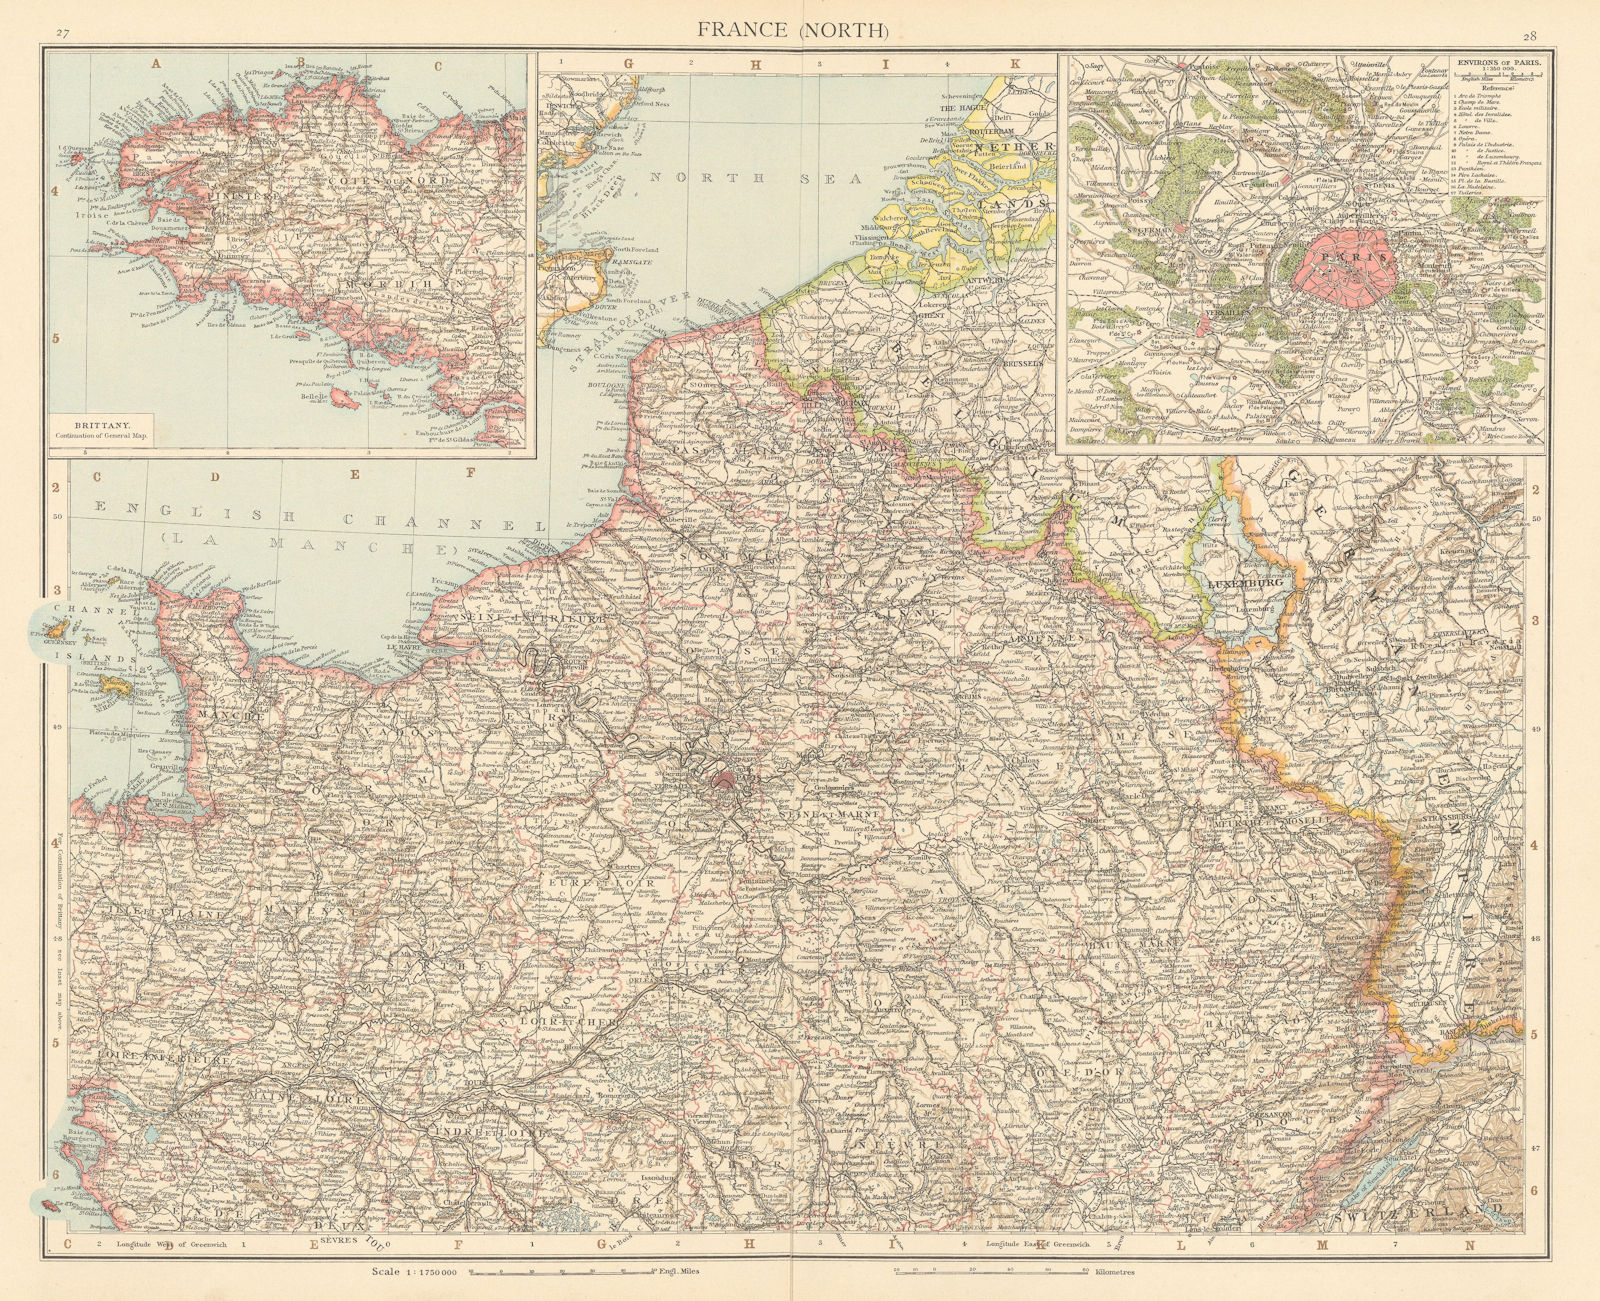 Associate Product France (North). Paris environs. THE TIMES 1895 old antique map plan chart